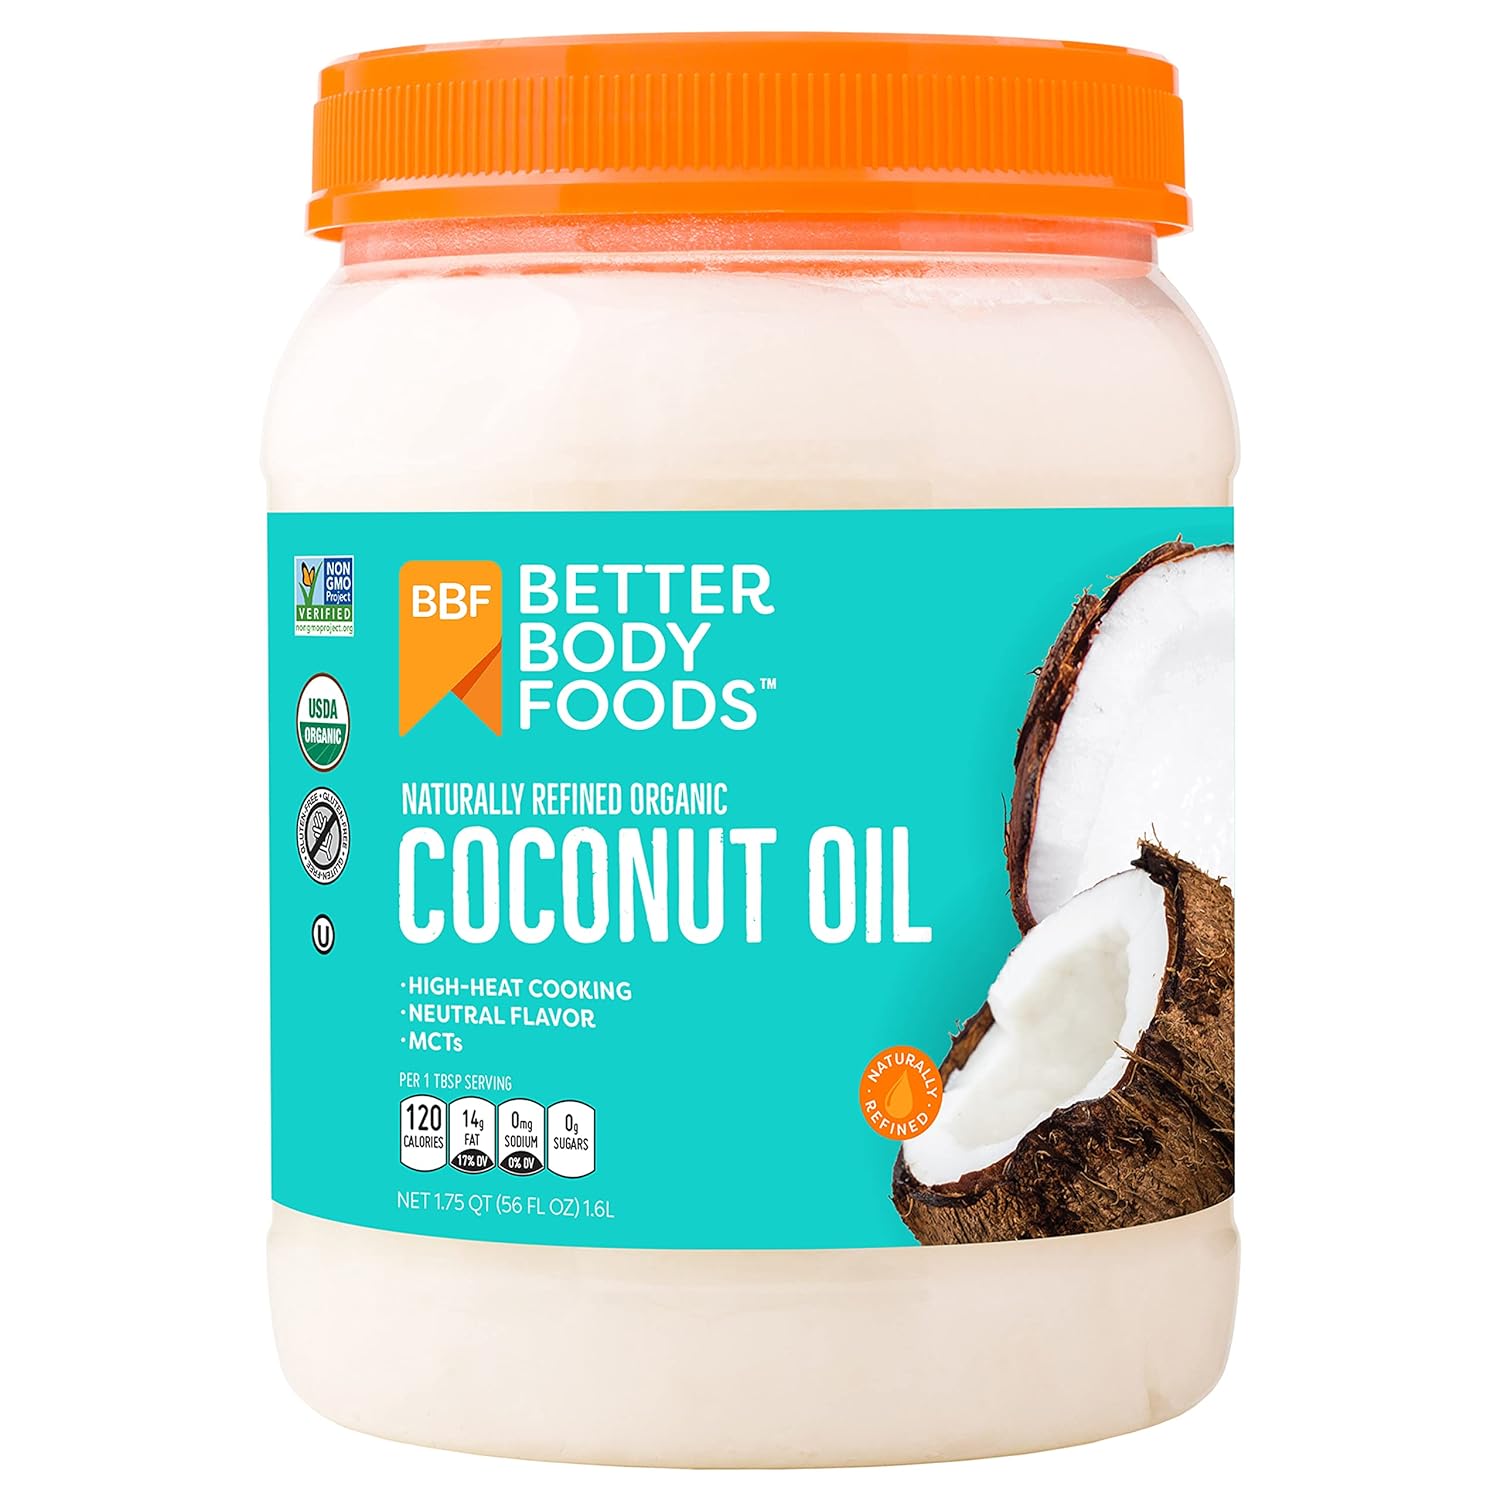 BetterBody Foods Naturally Refined Organic Coconut Oil